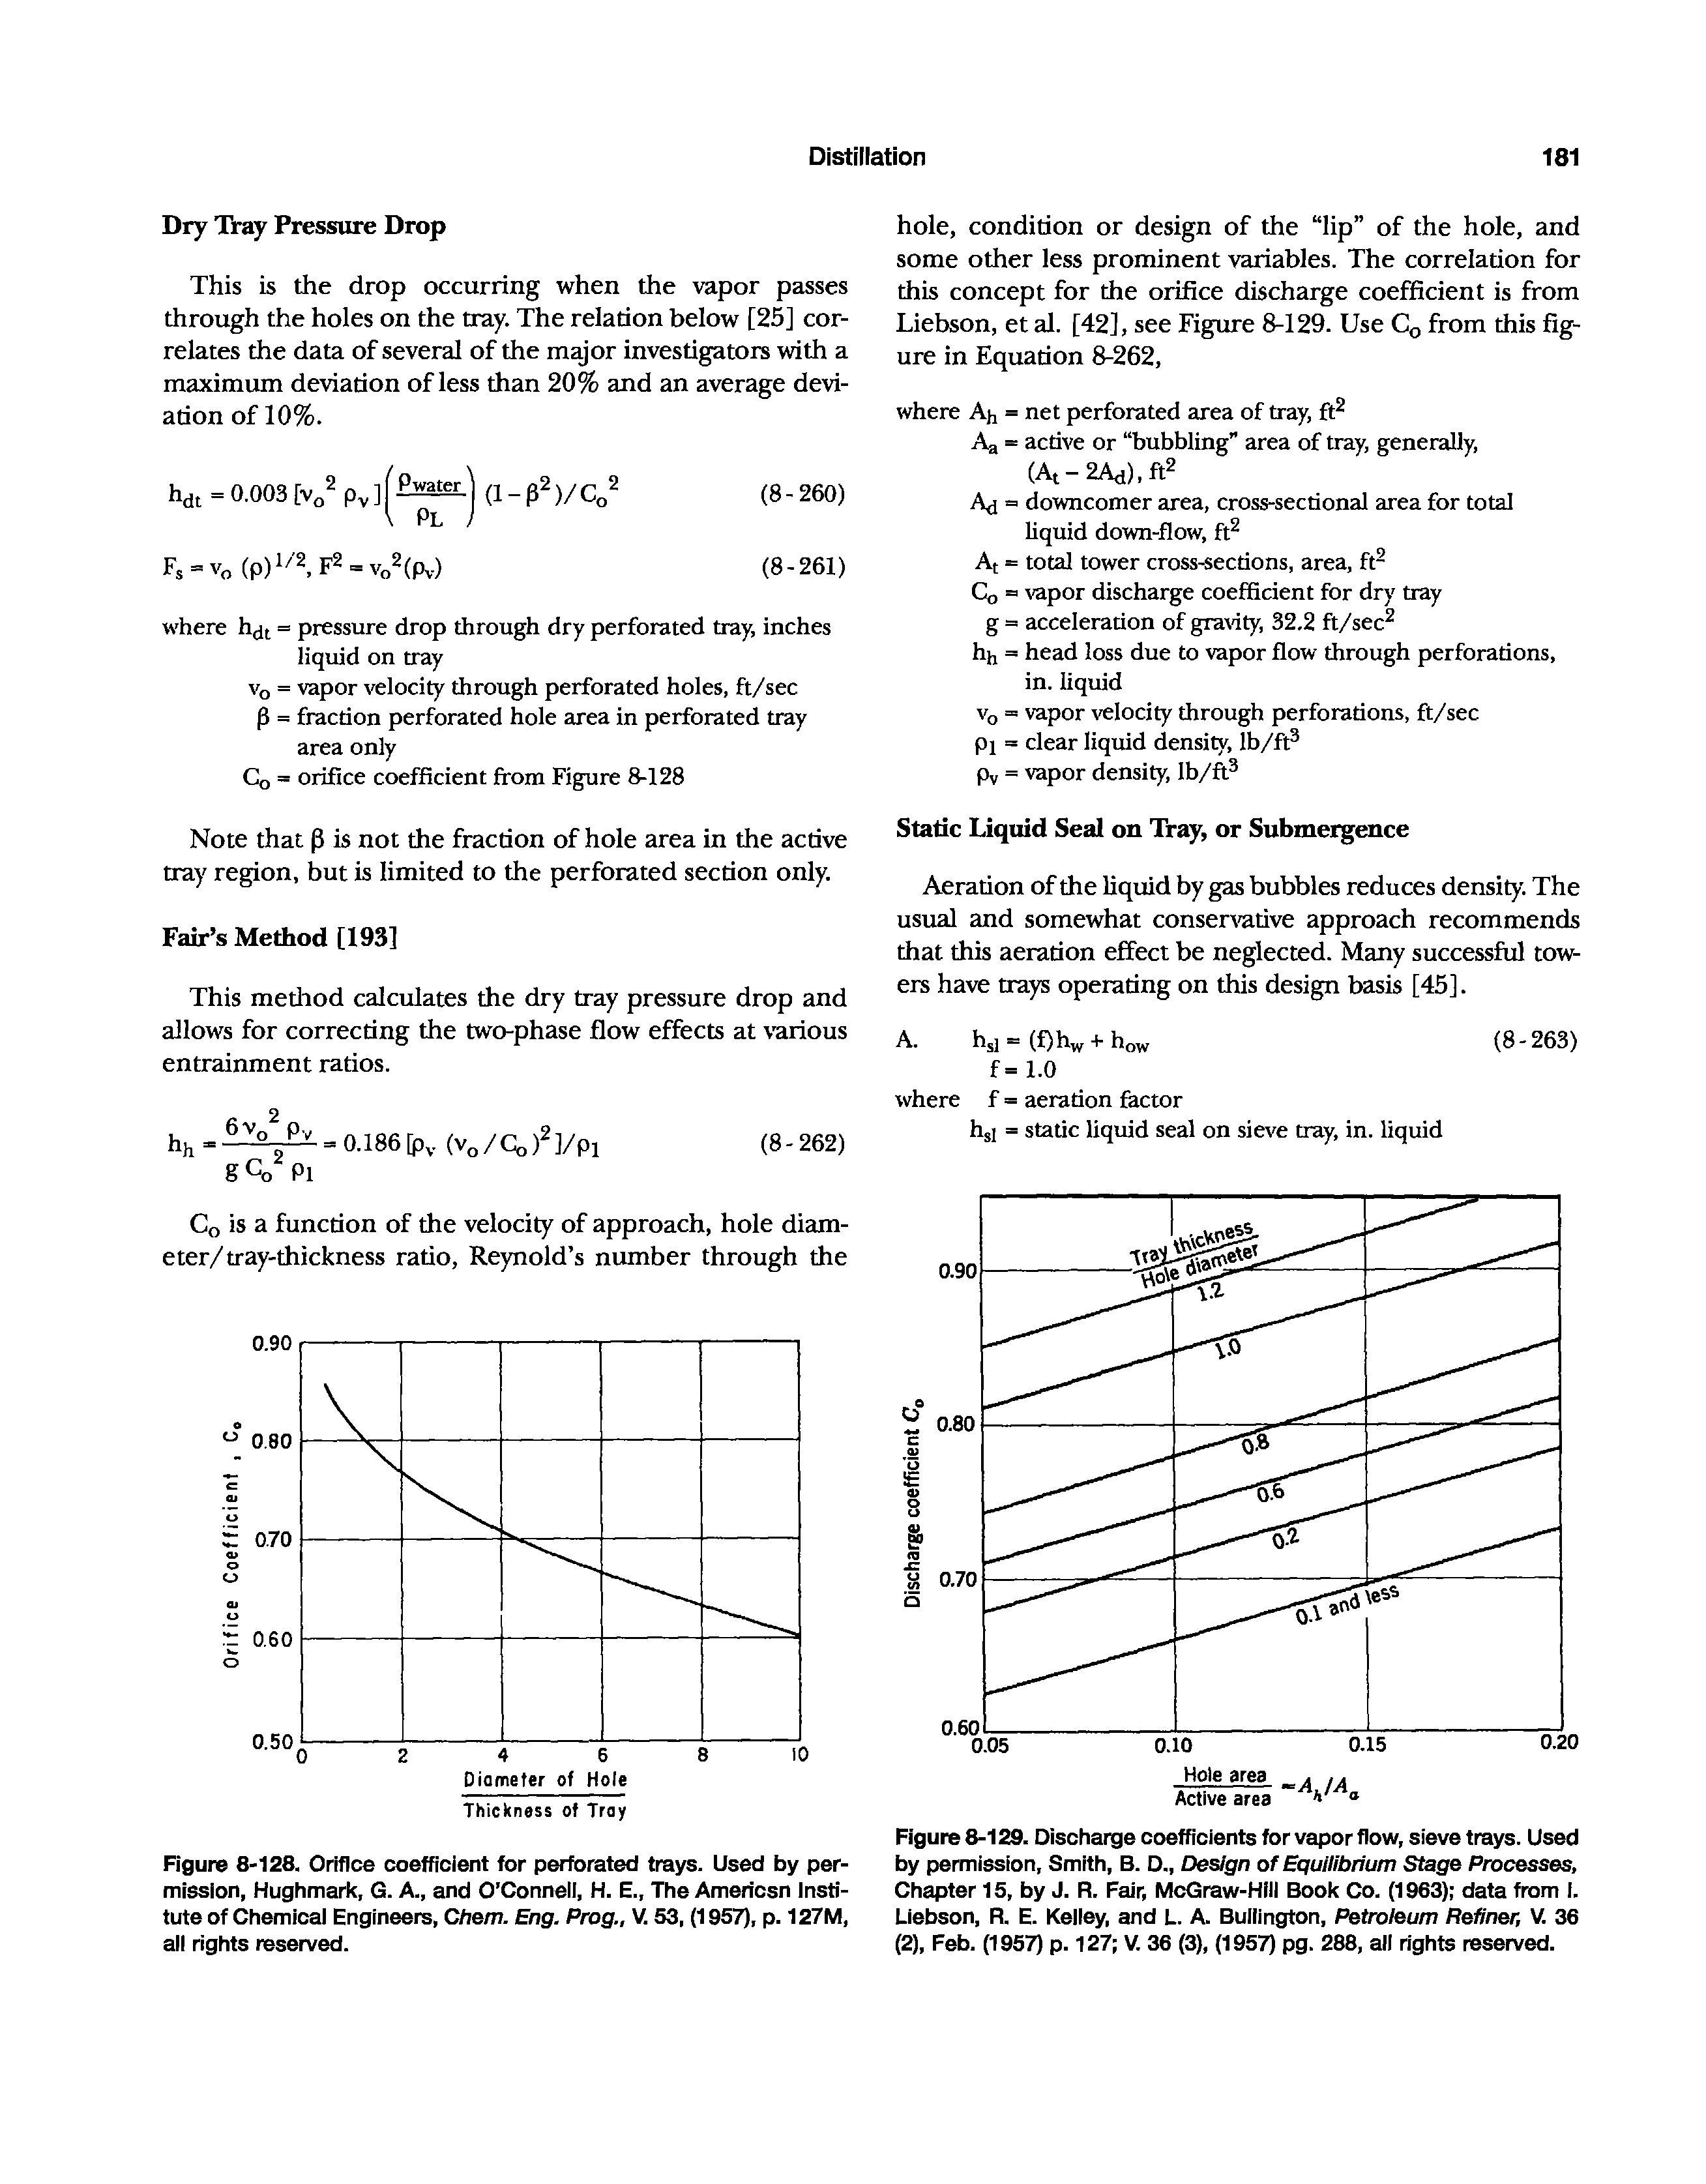 Figure 8-129. Discharge coefficients for vapor flow, sieve trays. Used by permission, Smith, B. O., Design of Equilibrium Stage Processes, Chapter 15, by J. R. Fair, McGraw-Hill Book Co. (1963) data from I. Liebson, R. E. Kelley, and L. A. Bullington, Petroleum Refiner, V. 36 (2), Feb. (1957) p. 127 V. 36 (3), (1957) pg. 288, all rights reserved.